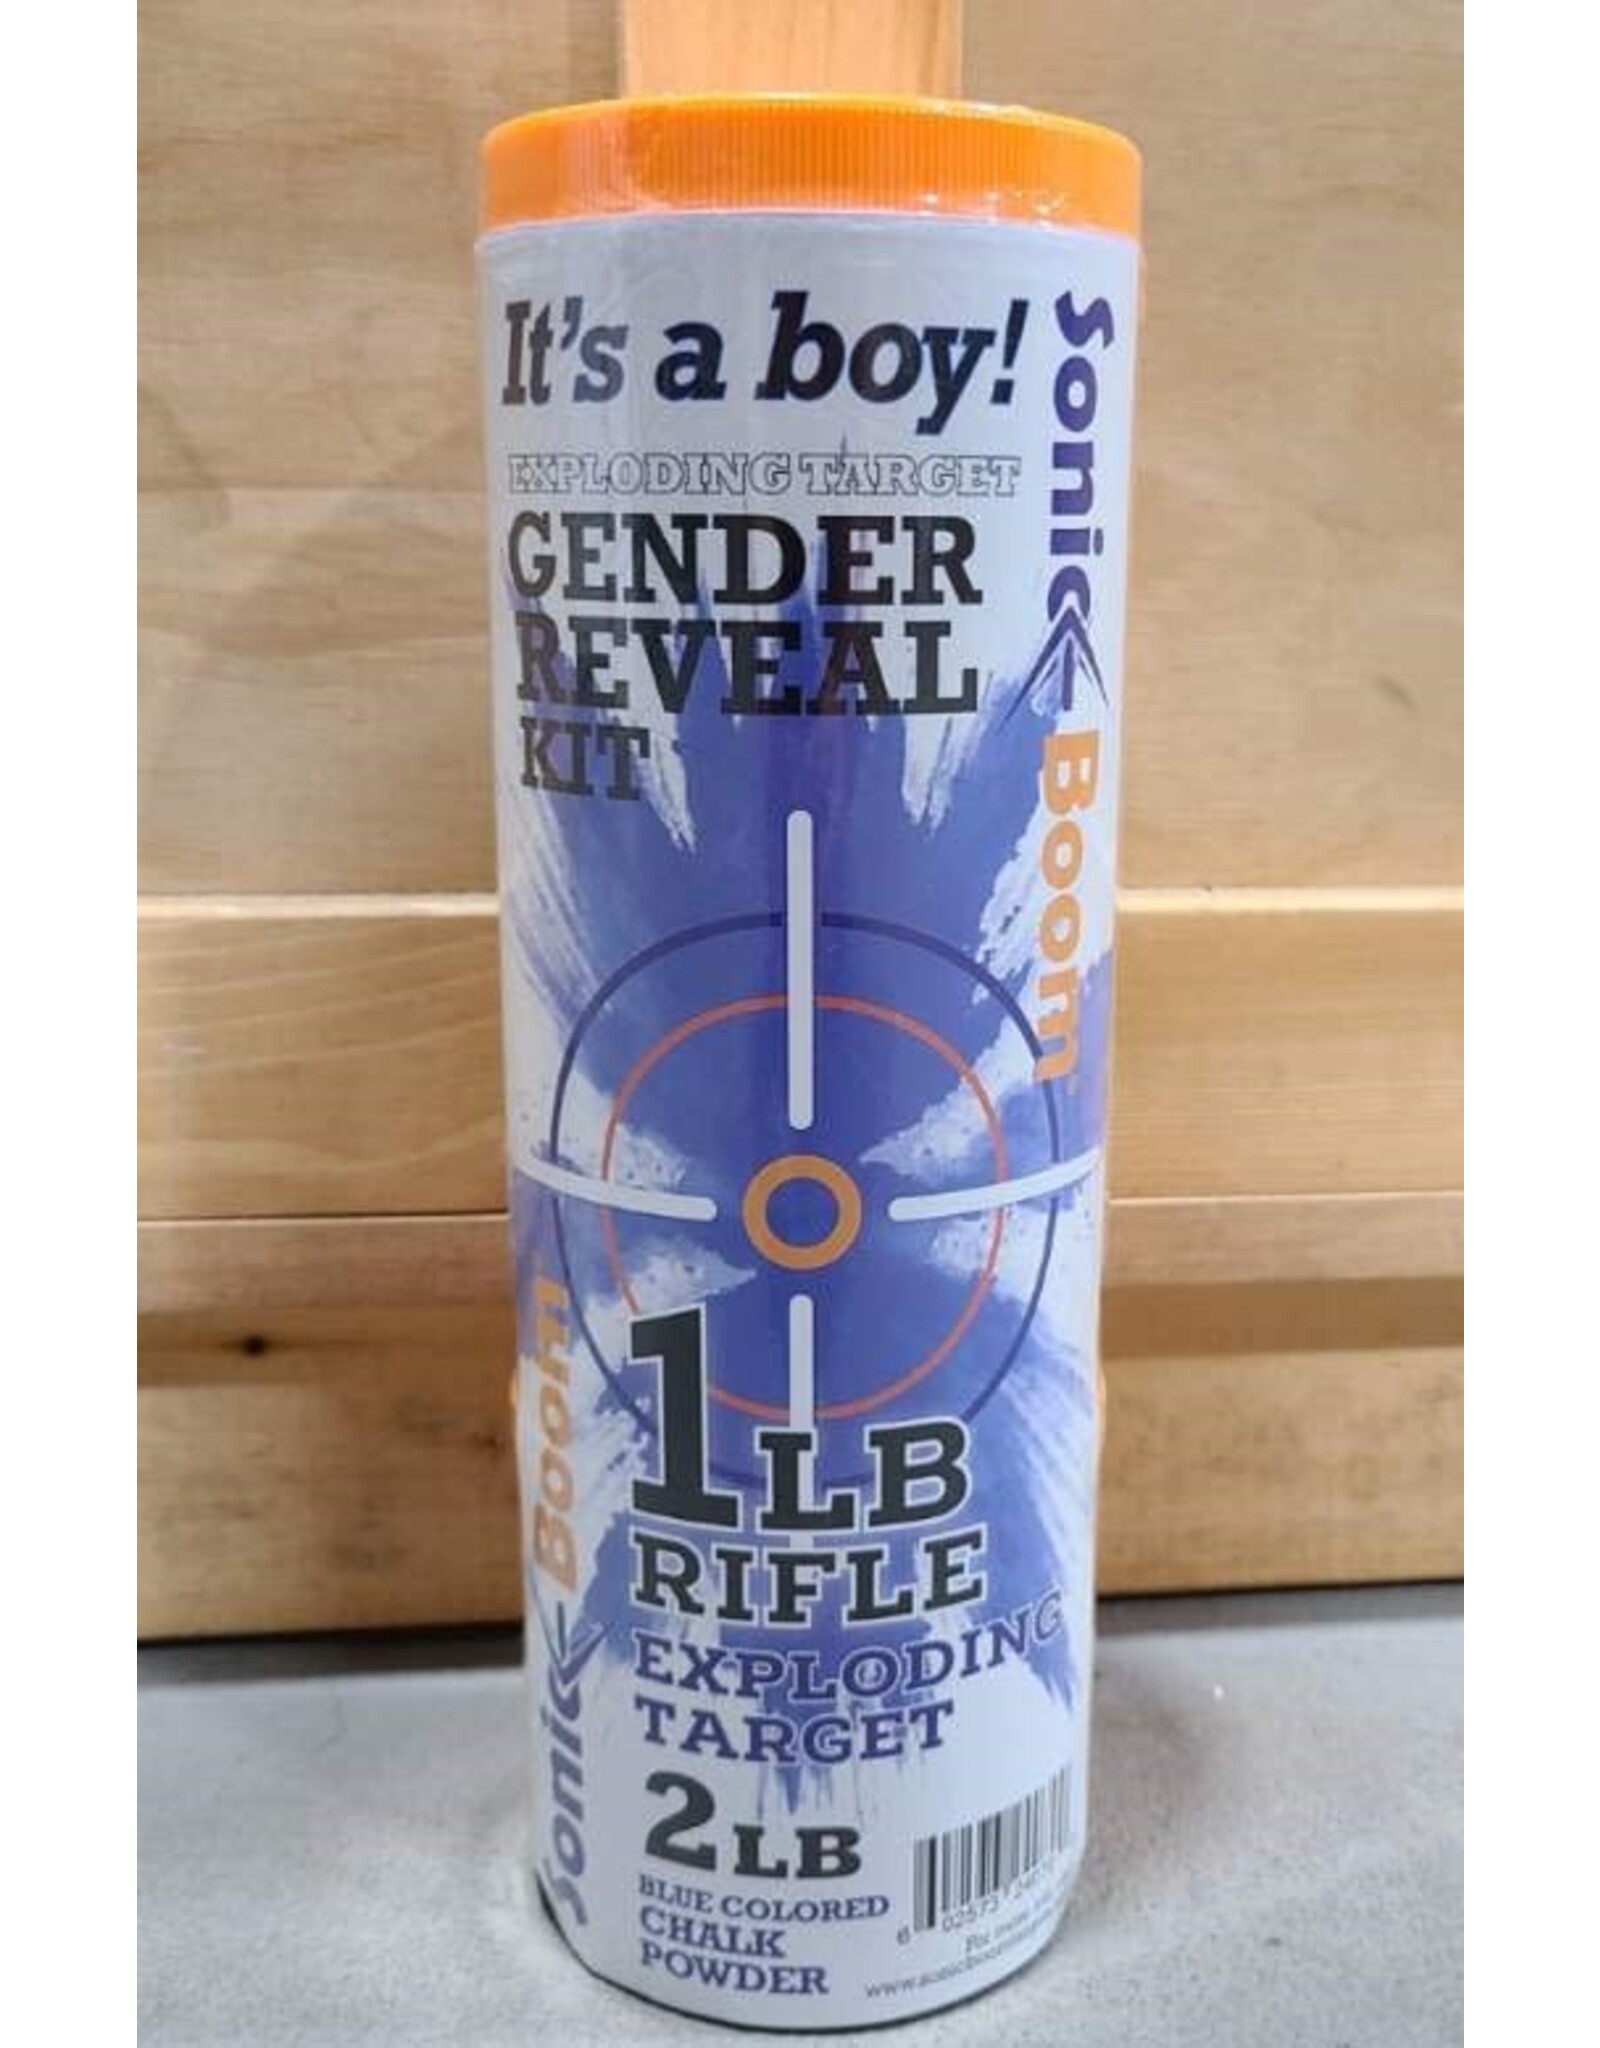 SONIC BOOM SONIC GENDER REVEAL 2lb (2 - 1lb CONTAINERS)